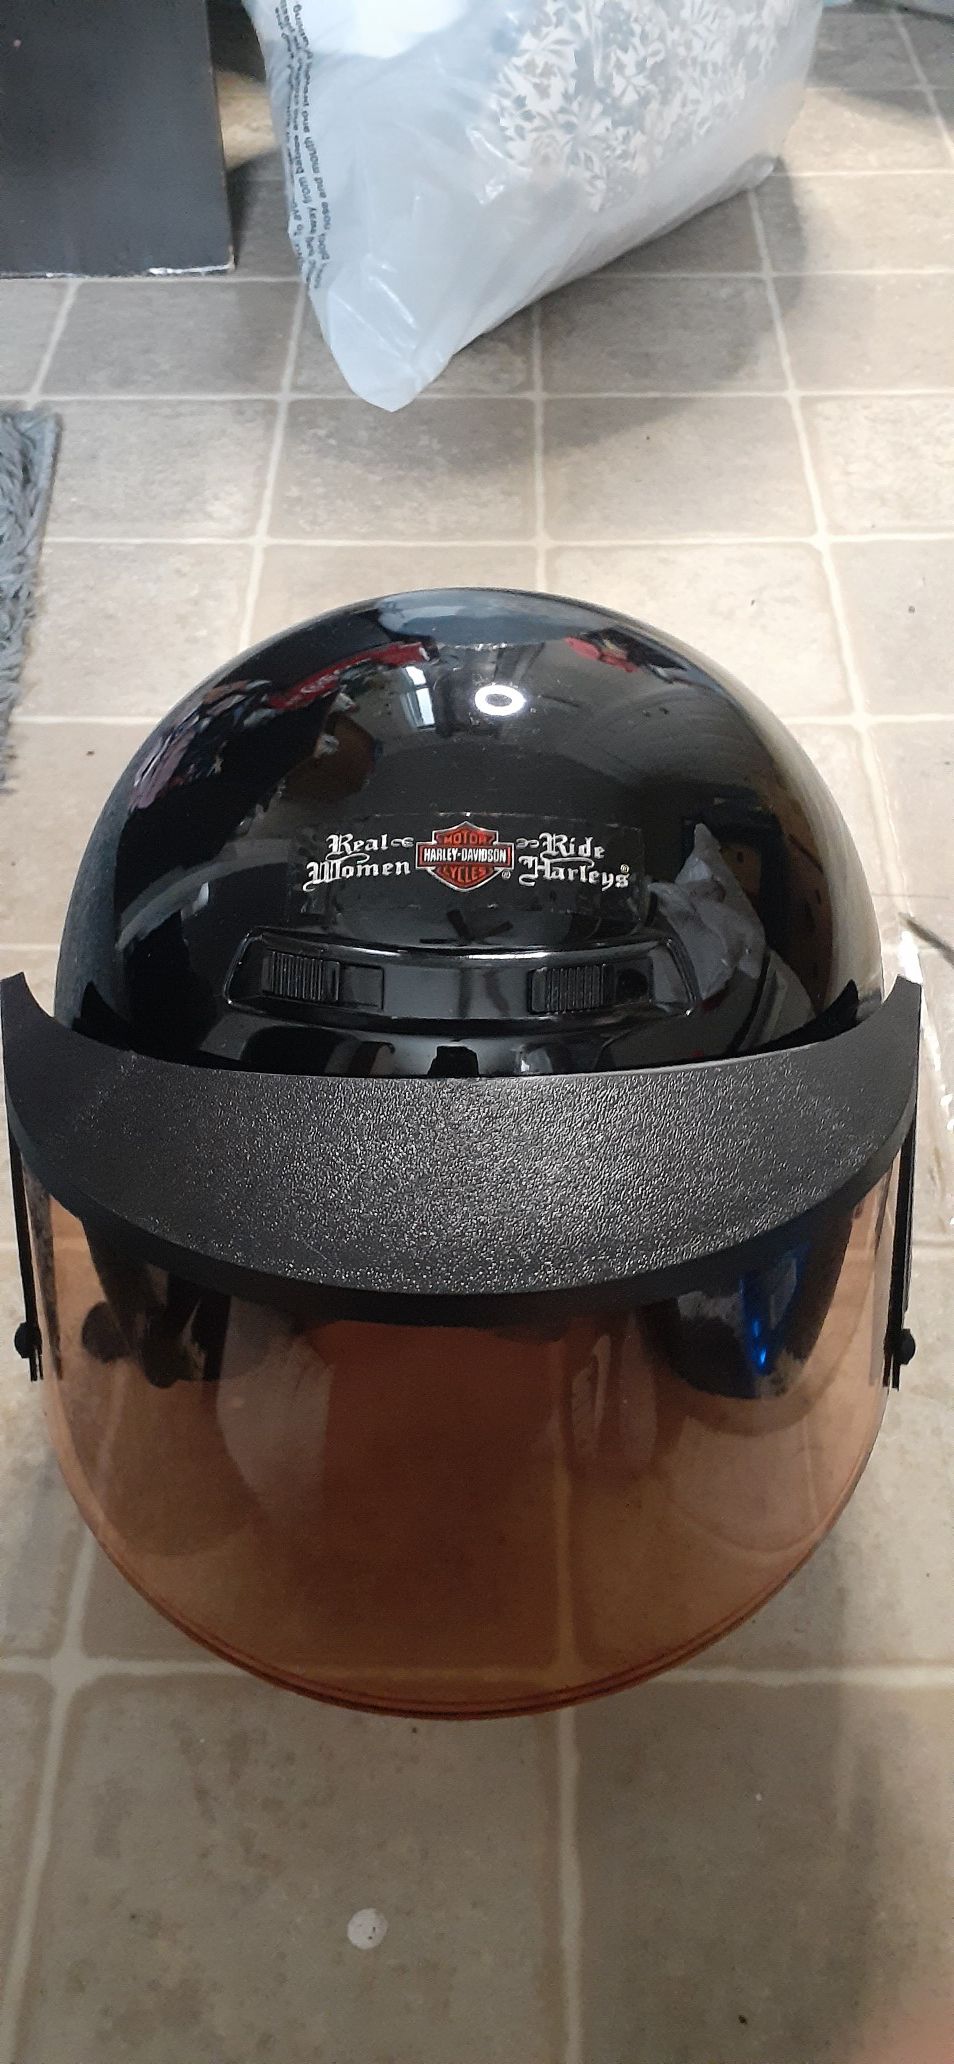 Harley Davidson's motorcycle helmet size small shipping available with offerup